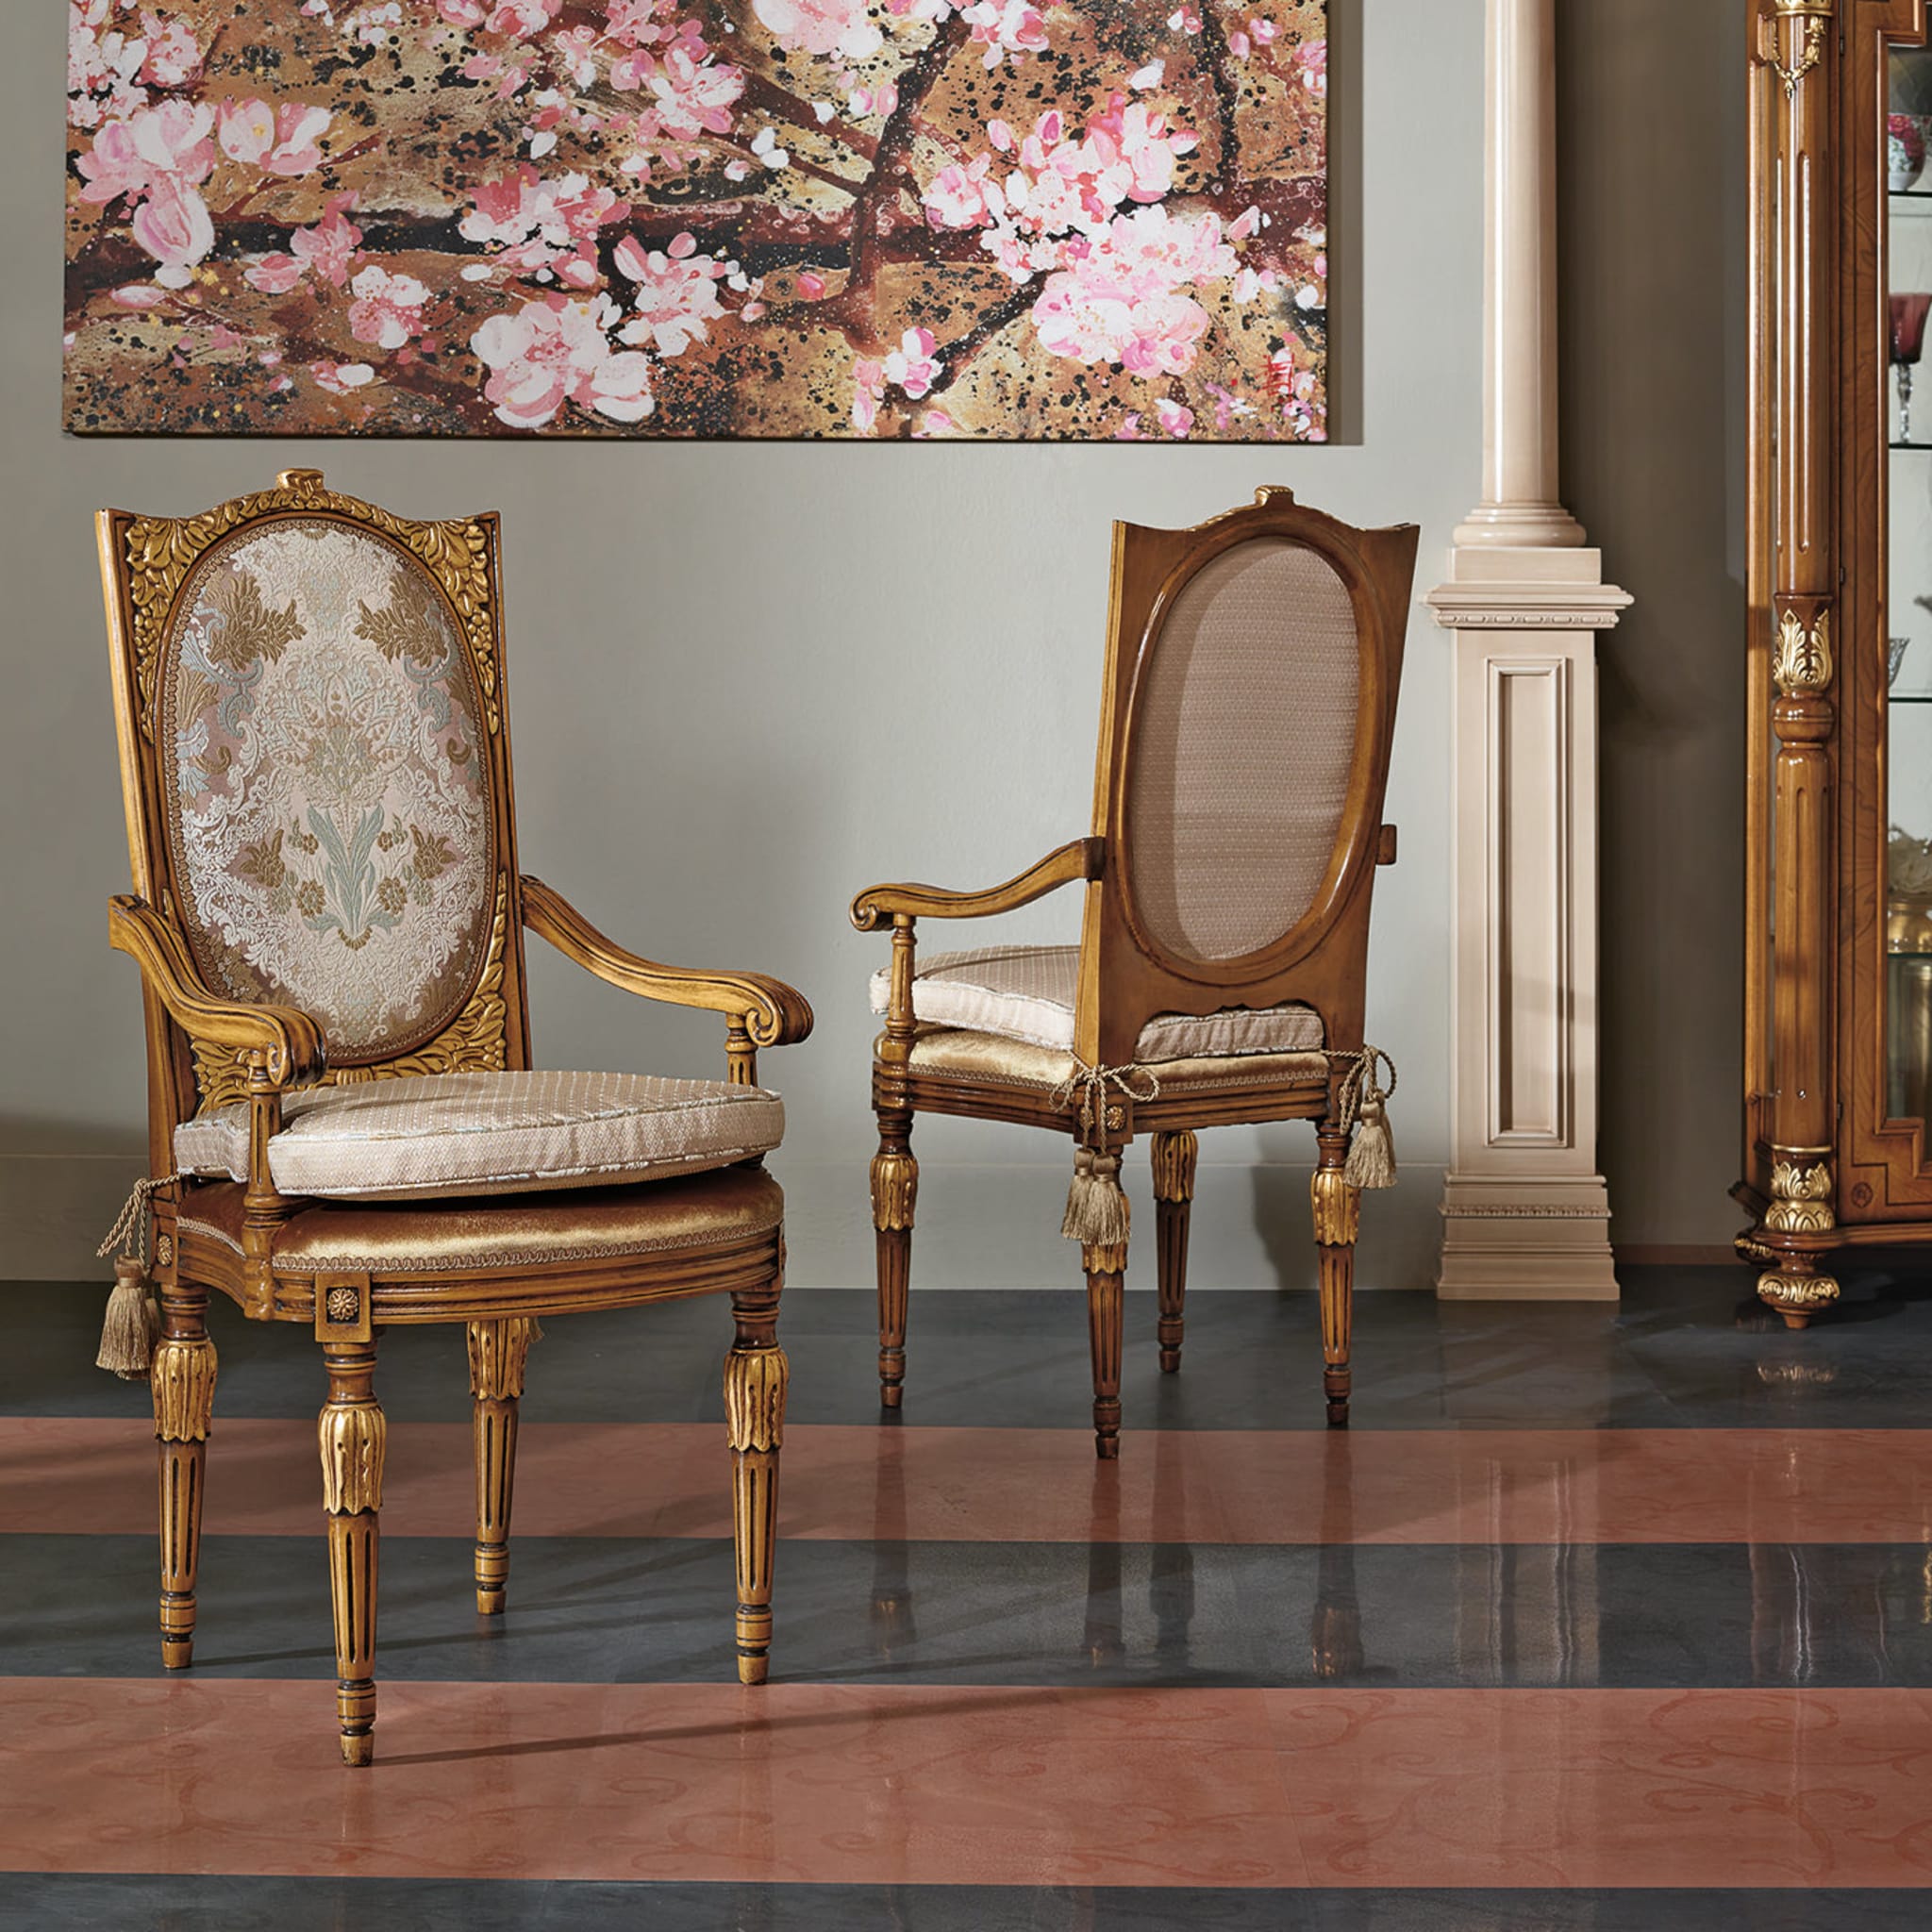 Upholstered Dining Armchair with Gold Inlays - Alternative view 1